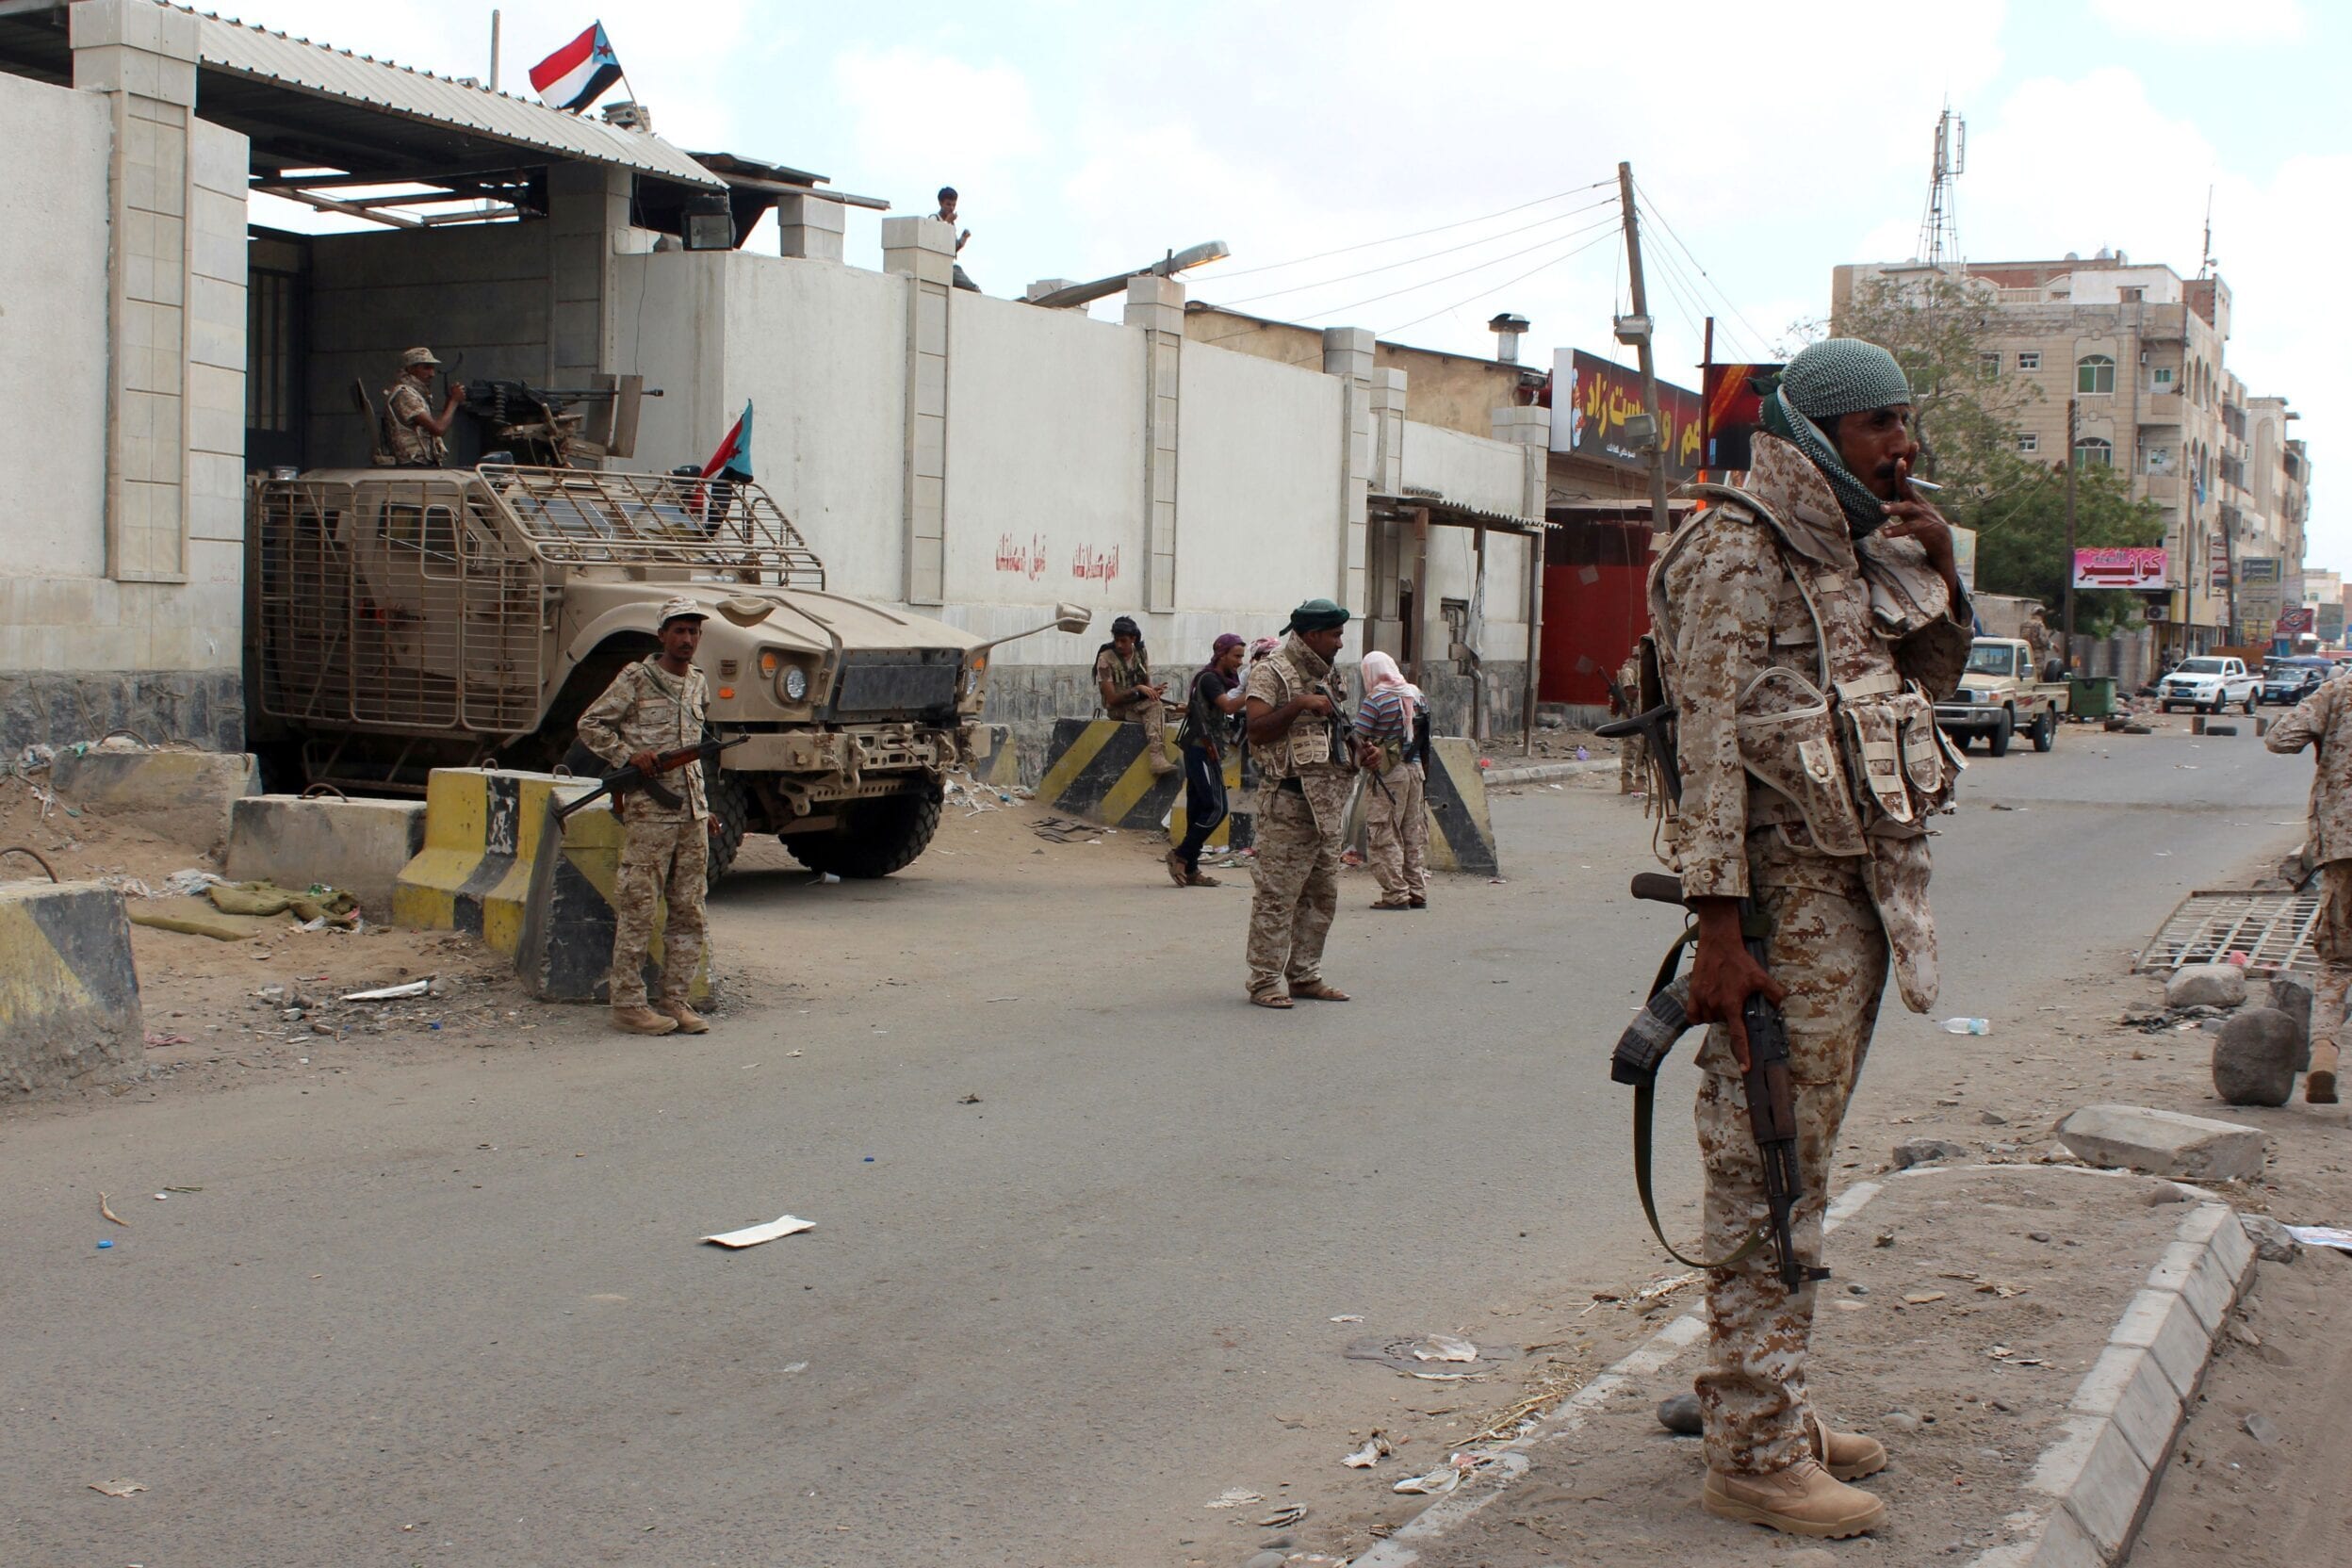 Loyalist forces stand guard outside the central prison in the Mansoura residential district of Yemen's second city of Aden on March 30, 2016 [SALEH AL-OBEIDI/AFP via Getty Images]